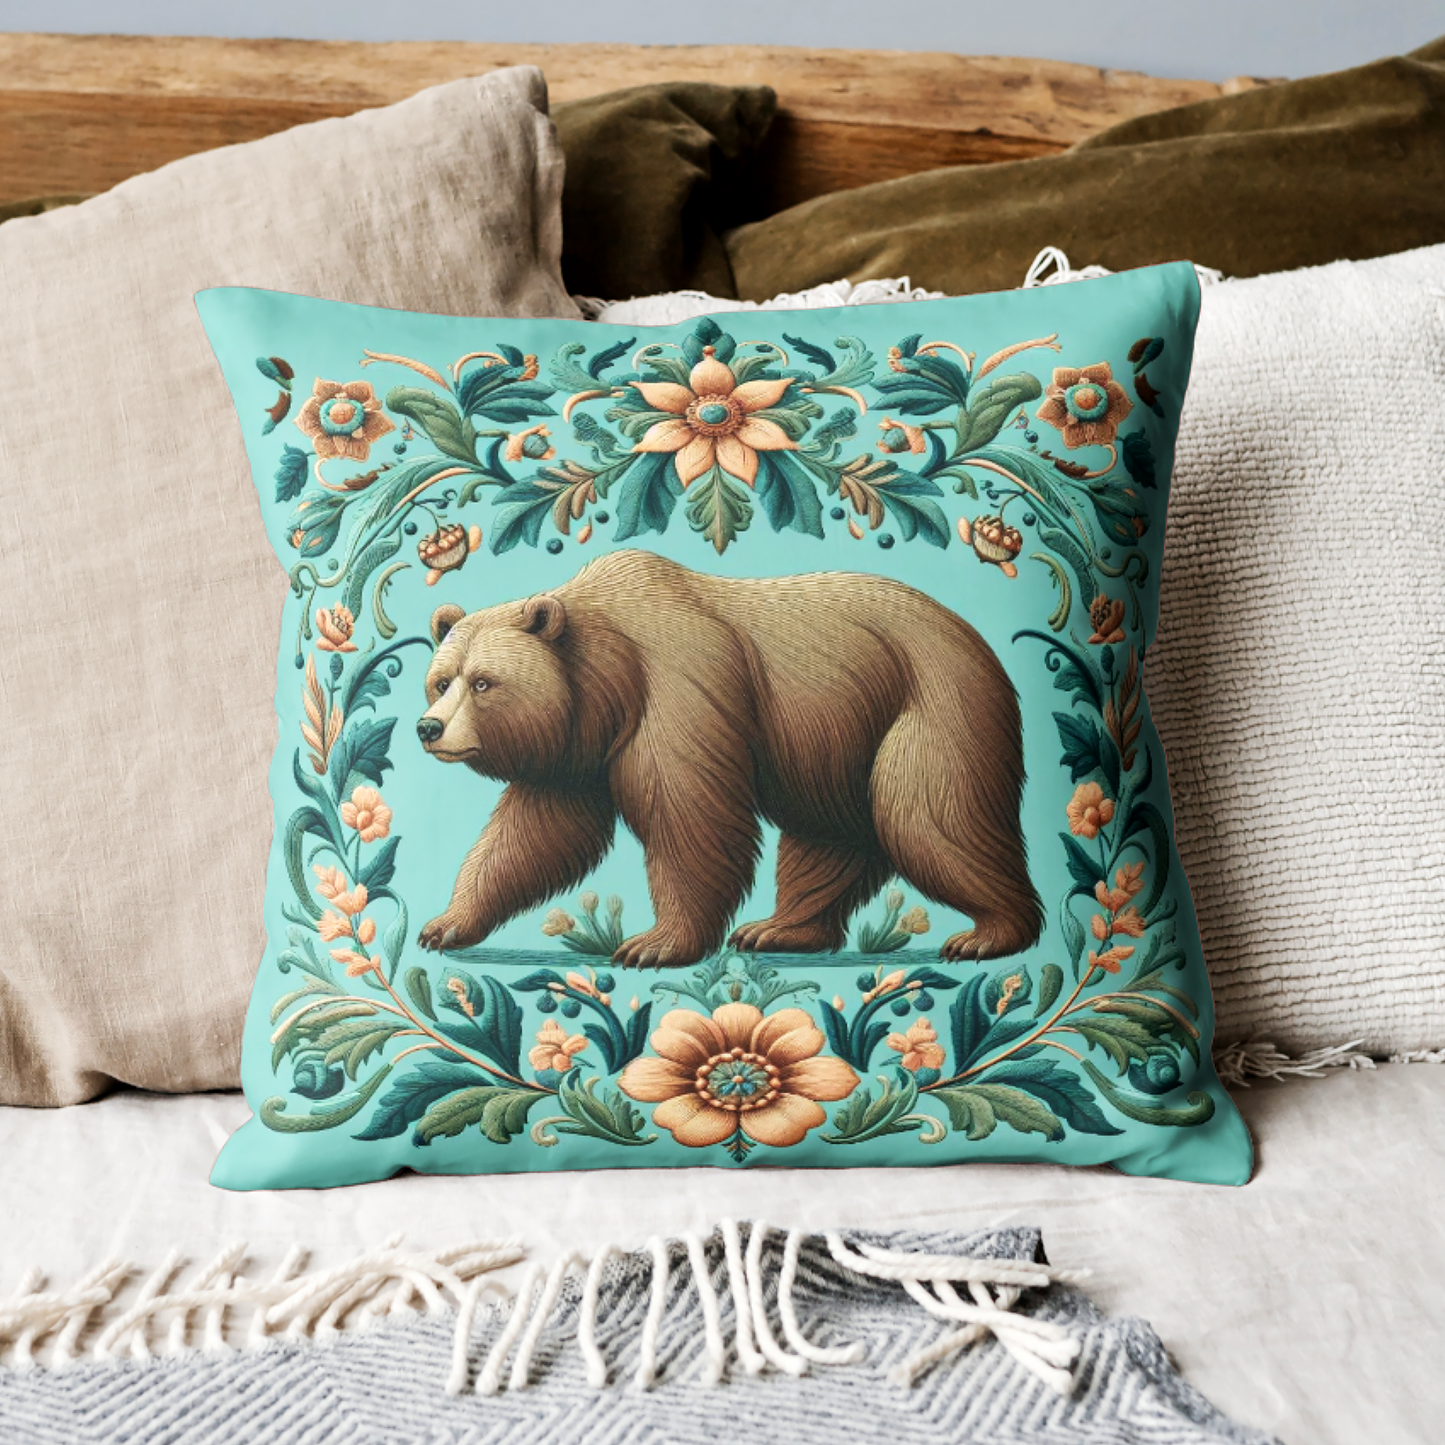 Floral Brown Bear Turquoise Vintage Throw Pillow Maximalist Style Polyester Cover Decorative Cushion Square 